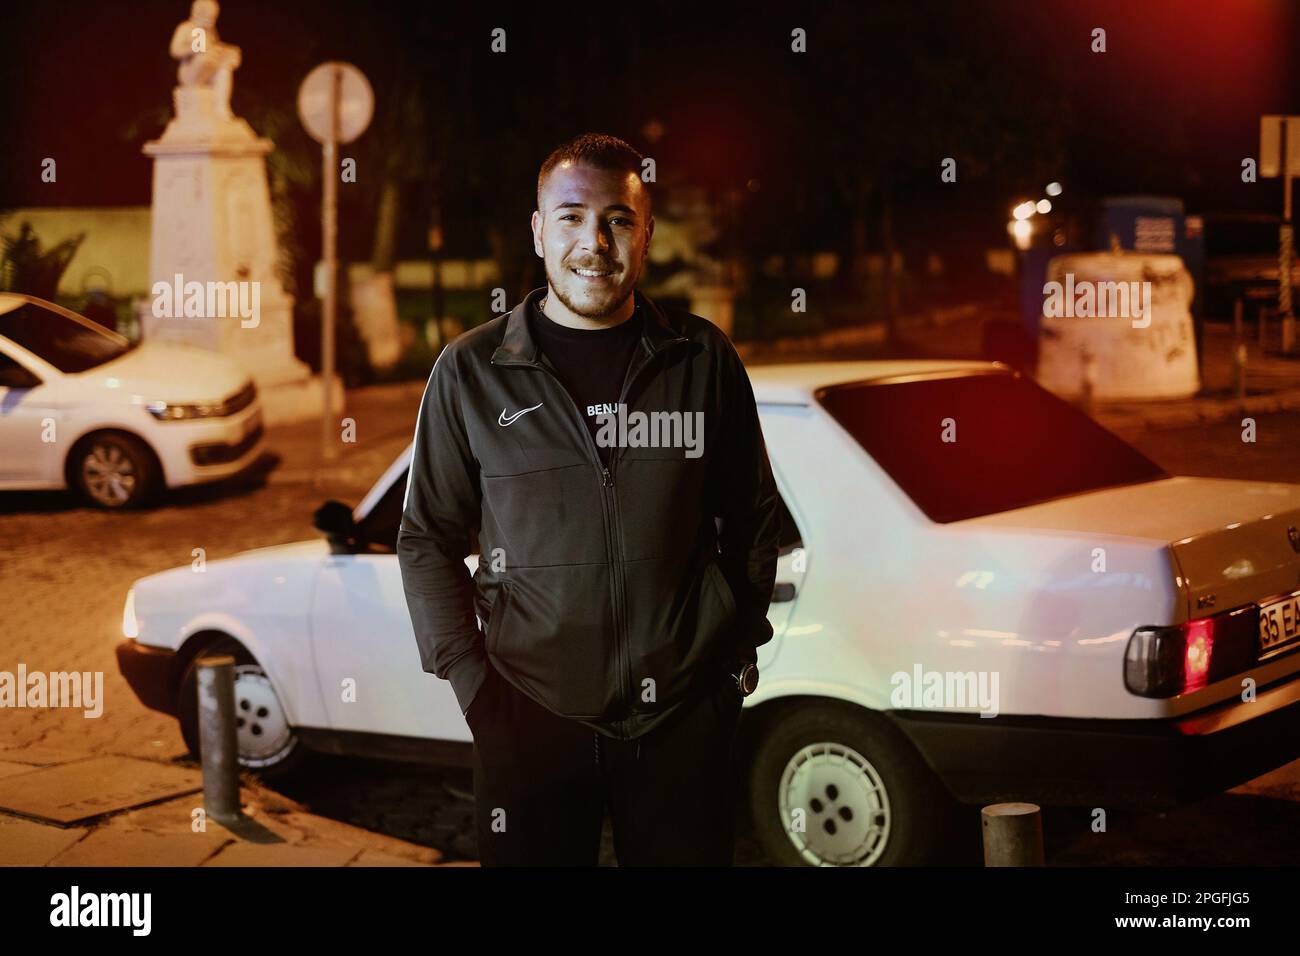 Izmir, Izmir, Turkiye. 22nd Mar, 2023. These vehicles, which are the stars of the 90s from subculture to families, are still a symbol of expression and rebellion, as well as being a vehicle for some members of the society in Turkey''¦ Mr Oguz; the young person in the photo, loves his vehicle very much. He cleans it every evening after daily use in Bornova district of Izmir''¦ The Tofas Murat 131, Sahin, Dogan, and Kartal are Turkish versions of the old Fiat 131 (older models) automobile made in the Turk Otomobil Fabrikasi A.S. factory in Bursa, Turkey. While dogan means ''falcon'' in Turkish, Stock Photo